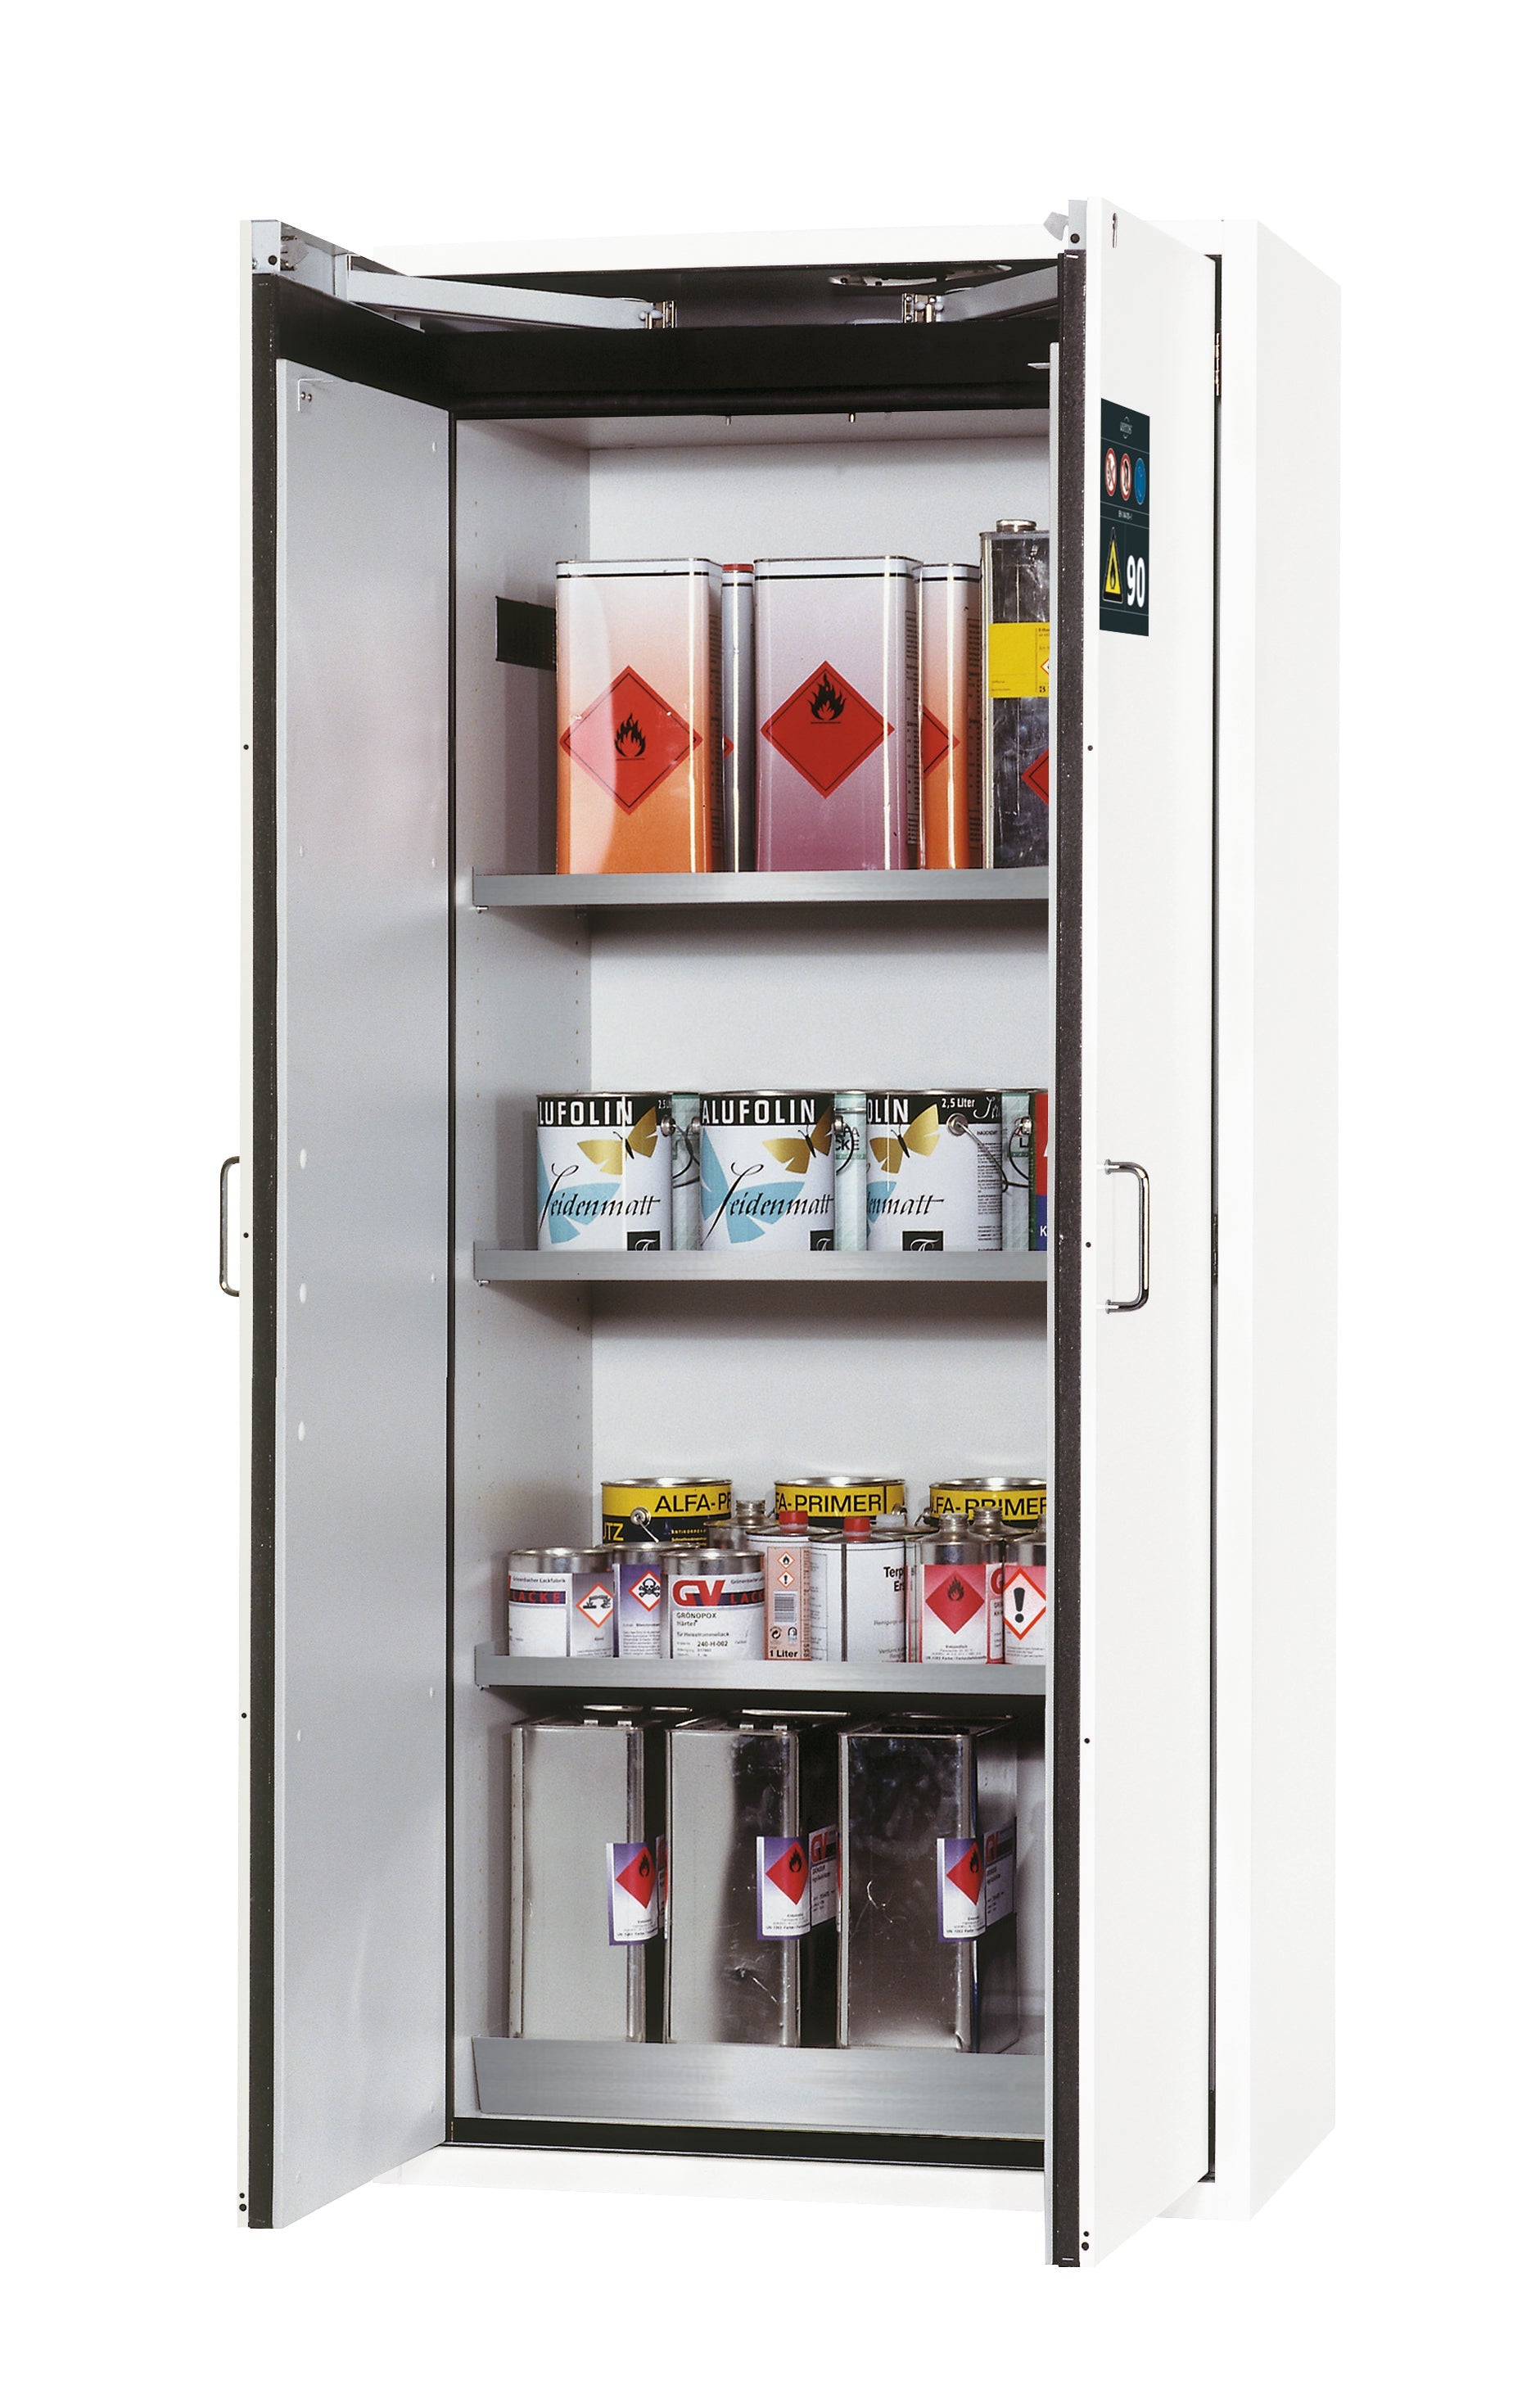 Type 90 safety cabinet S-CLASSIC-90 model S90.196.090.WDAS in laboratory white (similar to RAL 9016) with 3x standard shelves (stainless steel 1.4301)